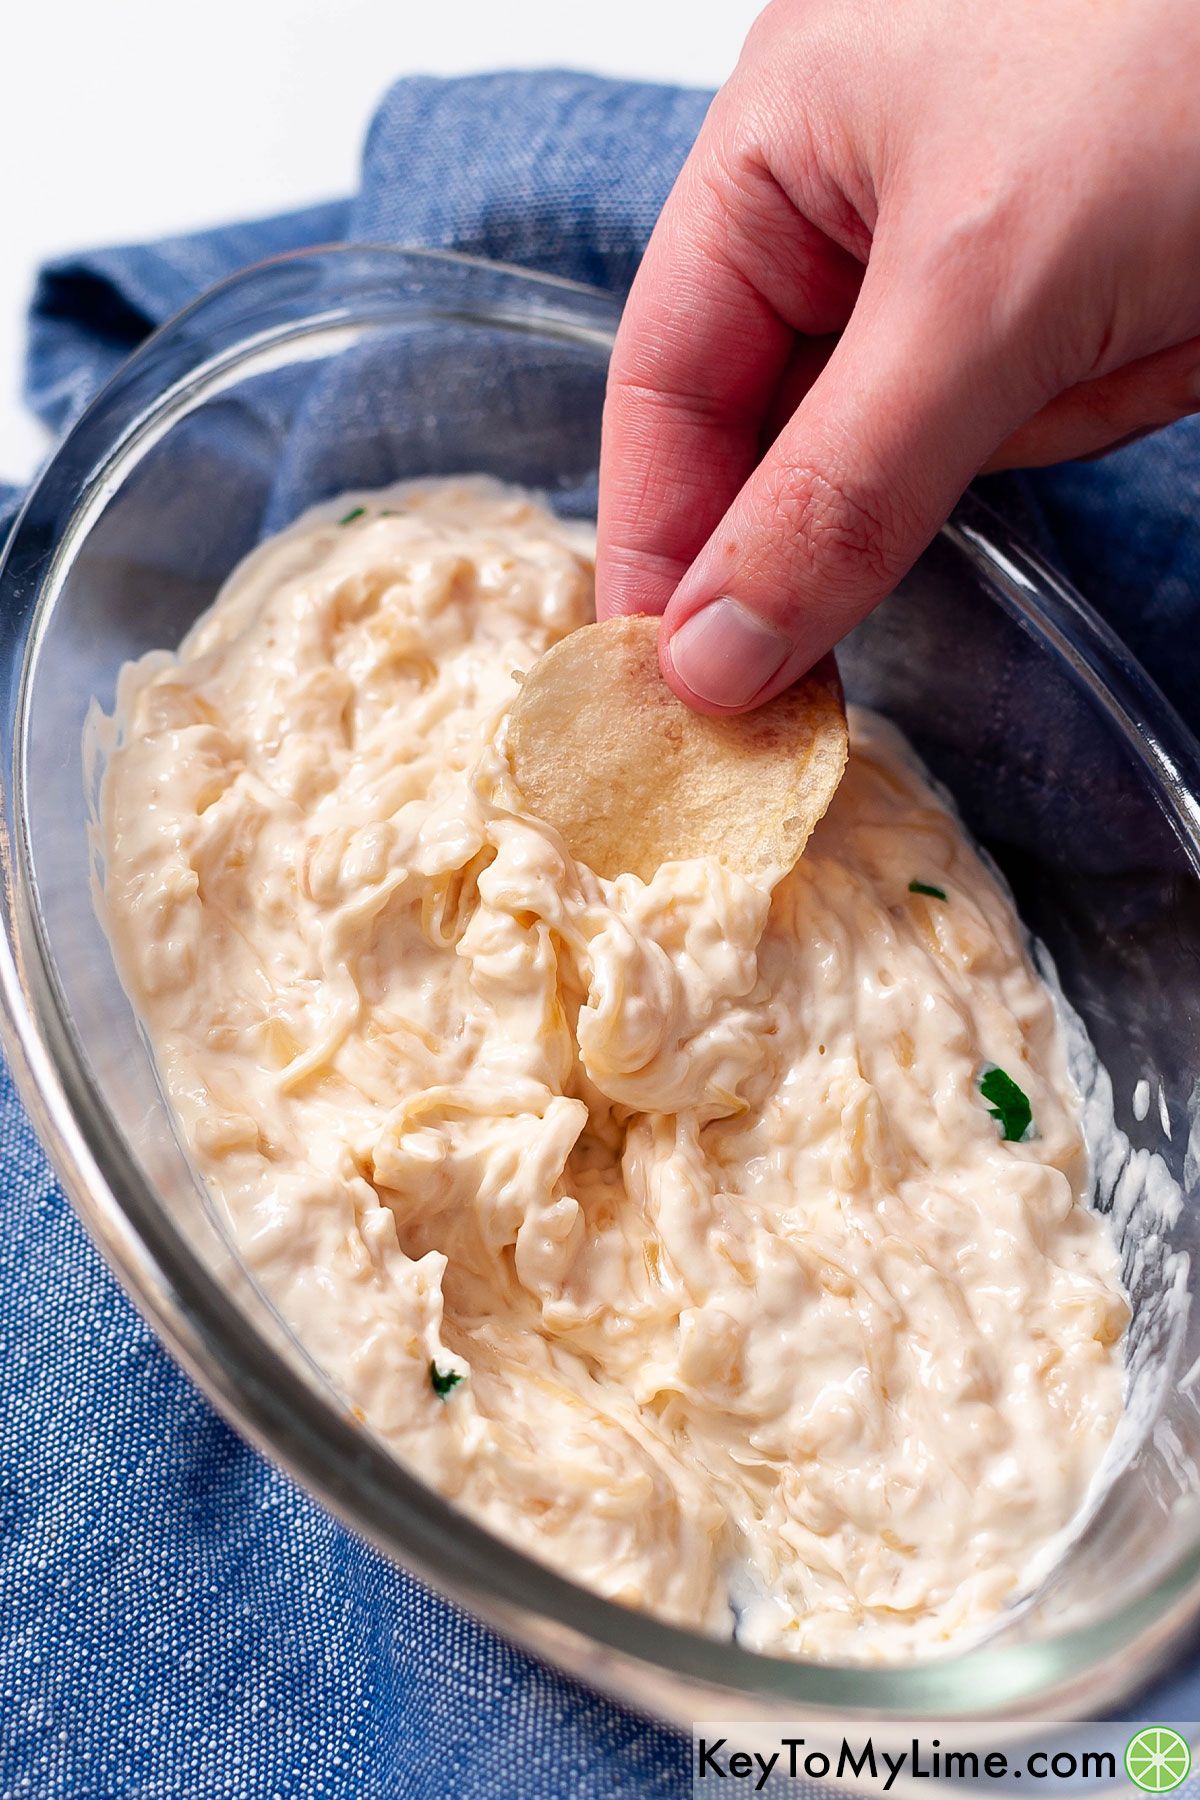 Dipping a potato chip into French onion dip.